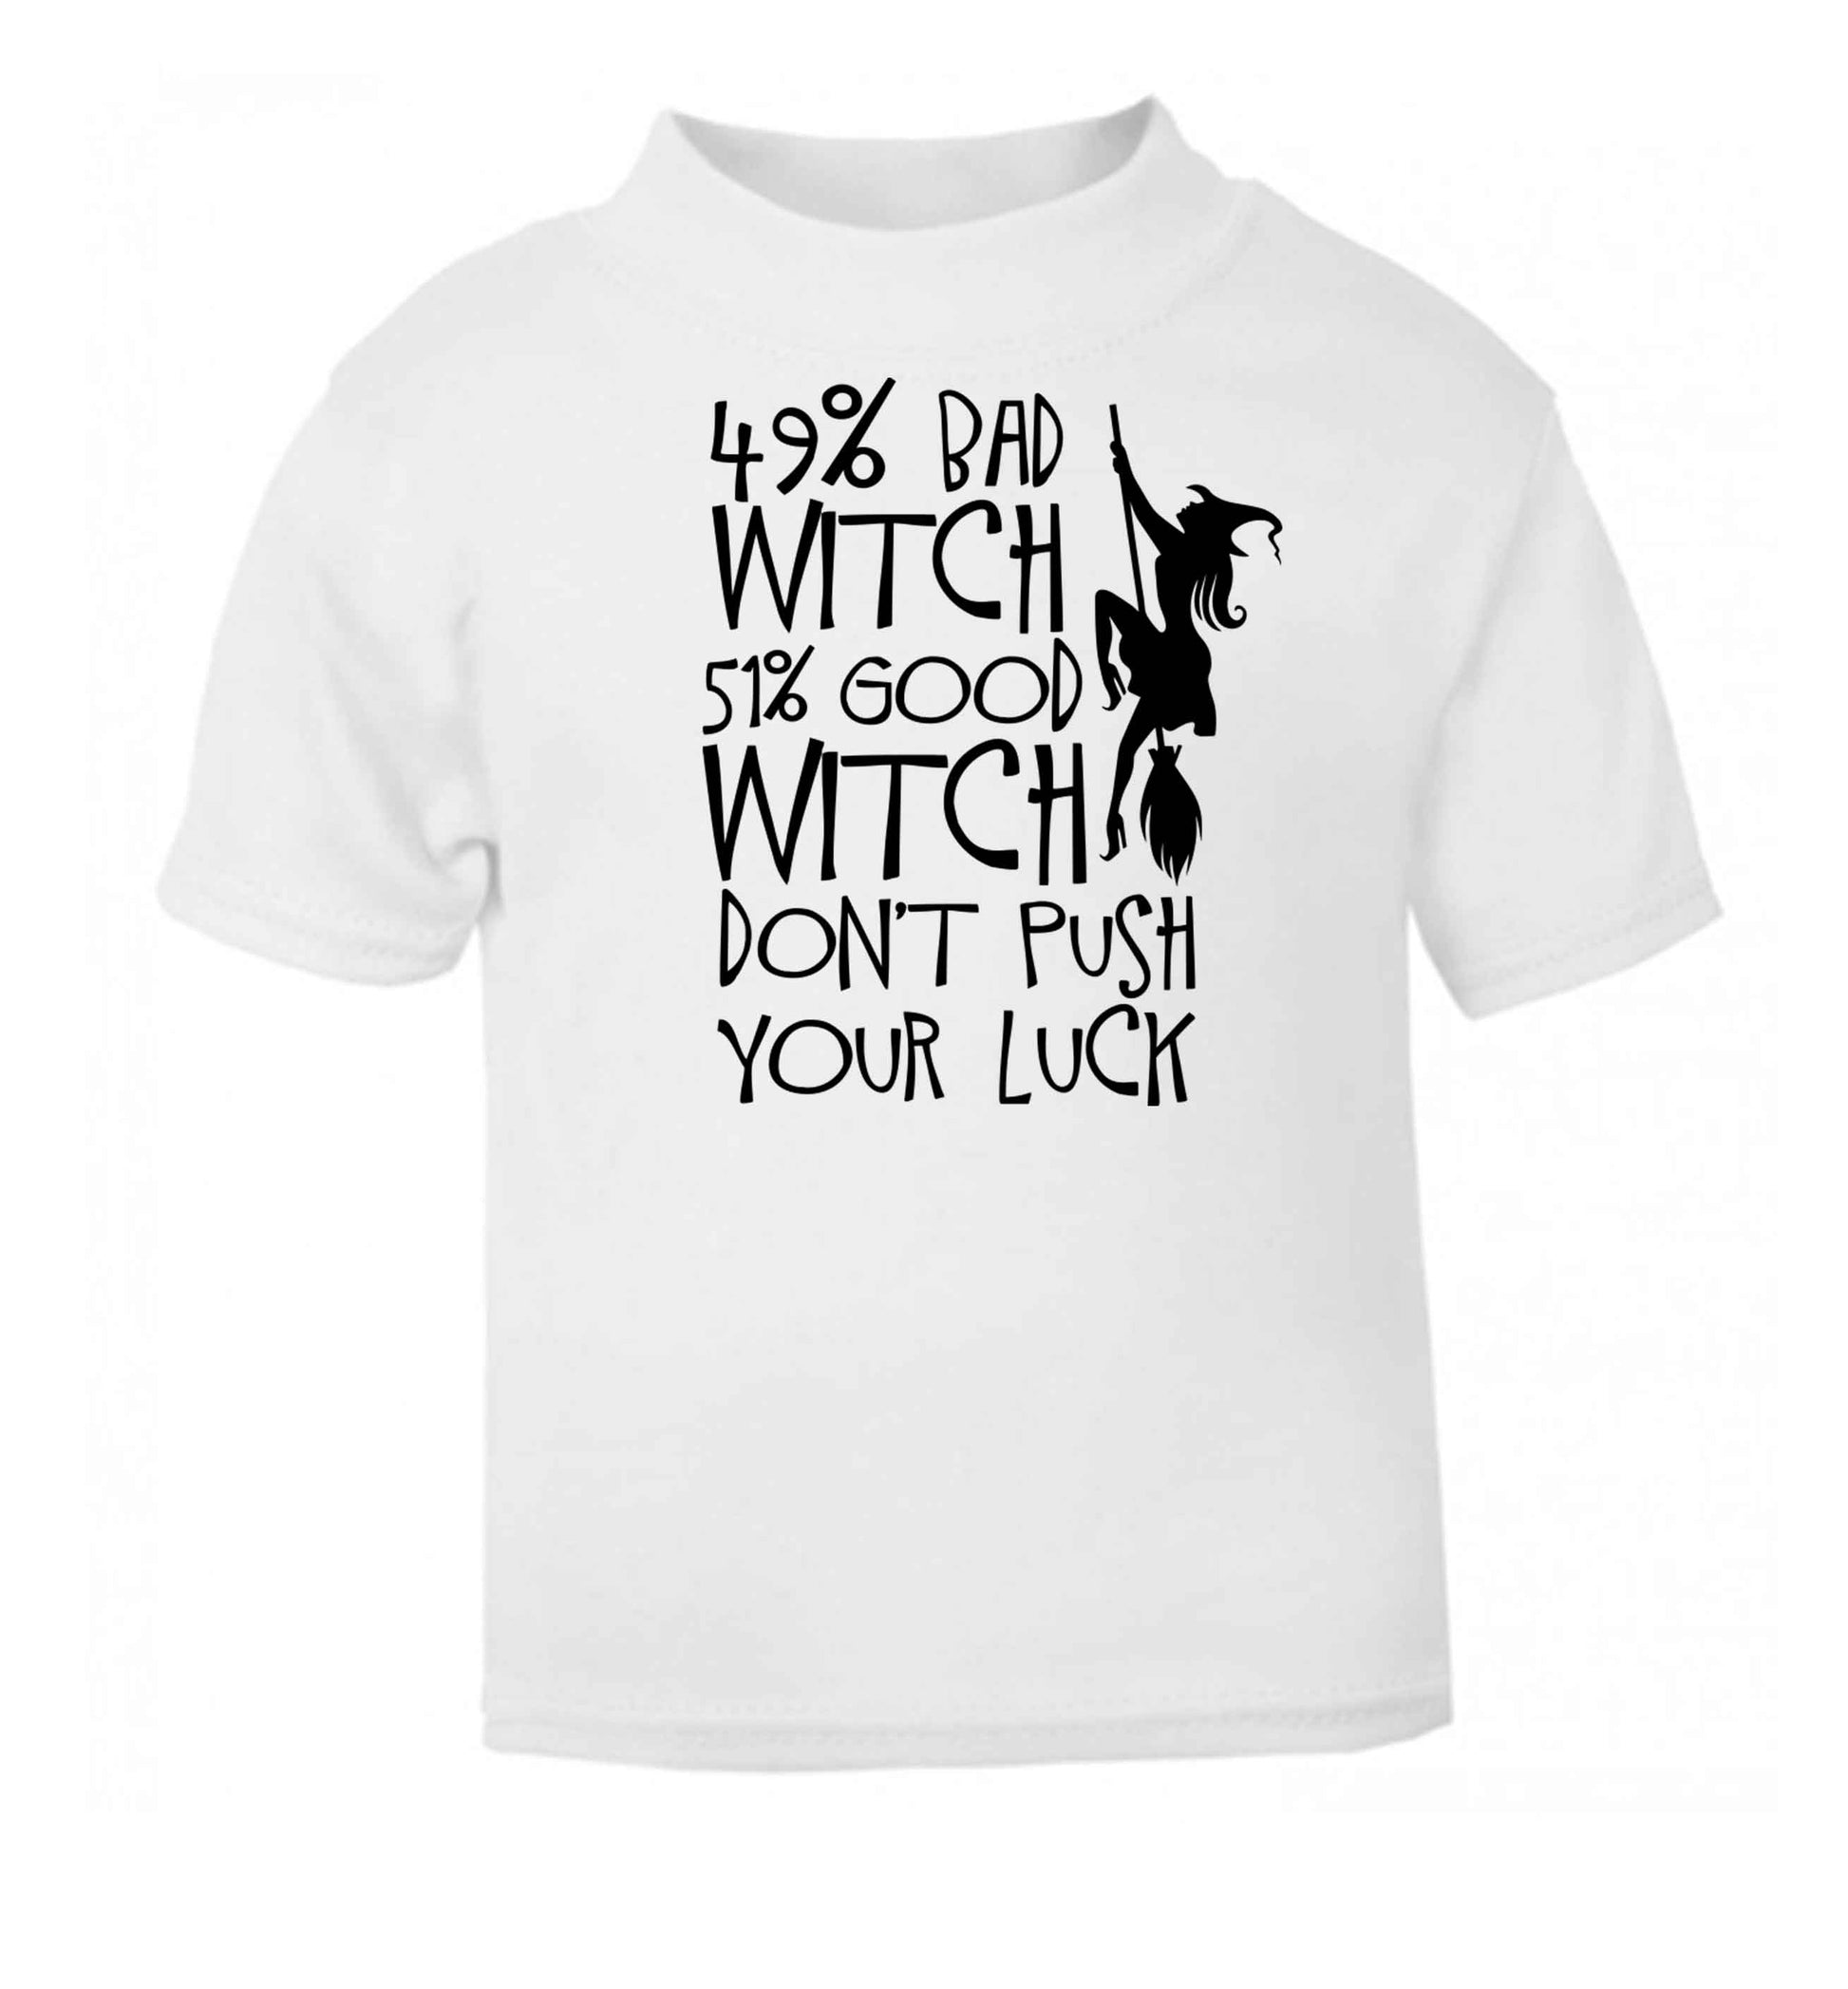 49% bad witch 51% good witch don't push your luck white baby toddler Tshirt 2 Years